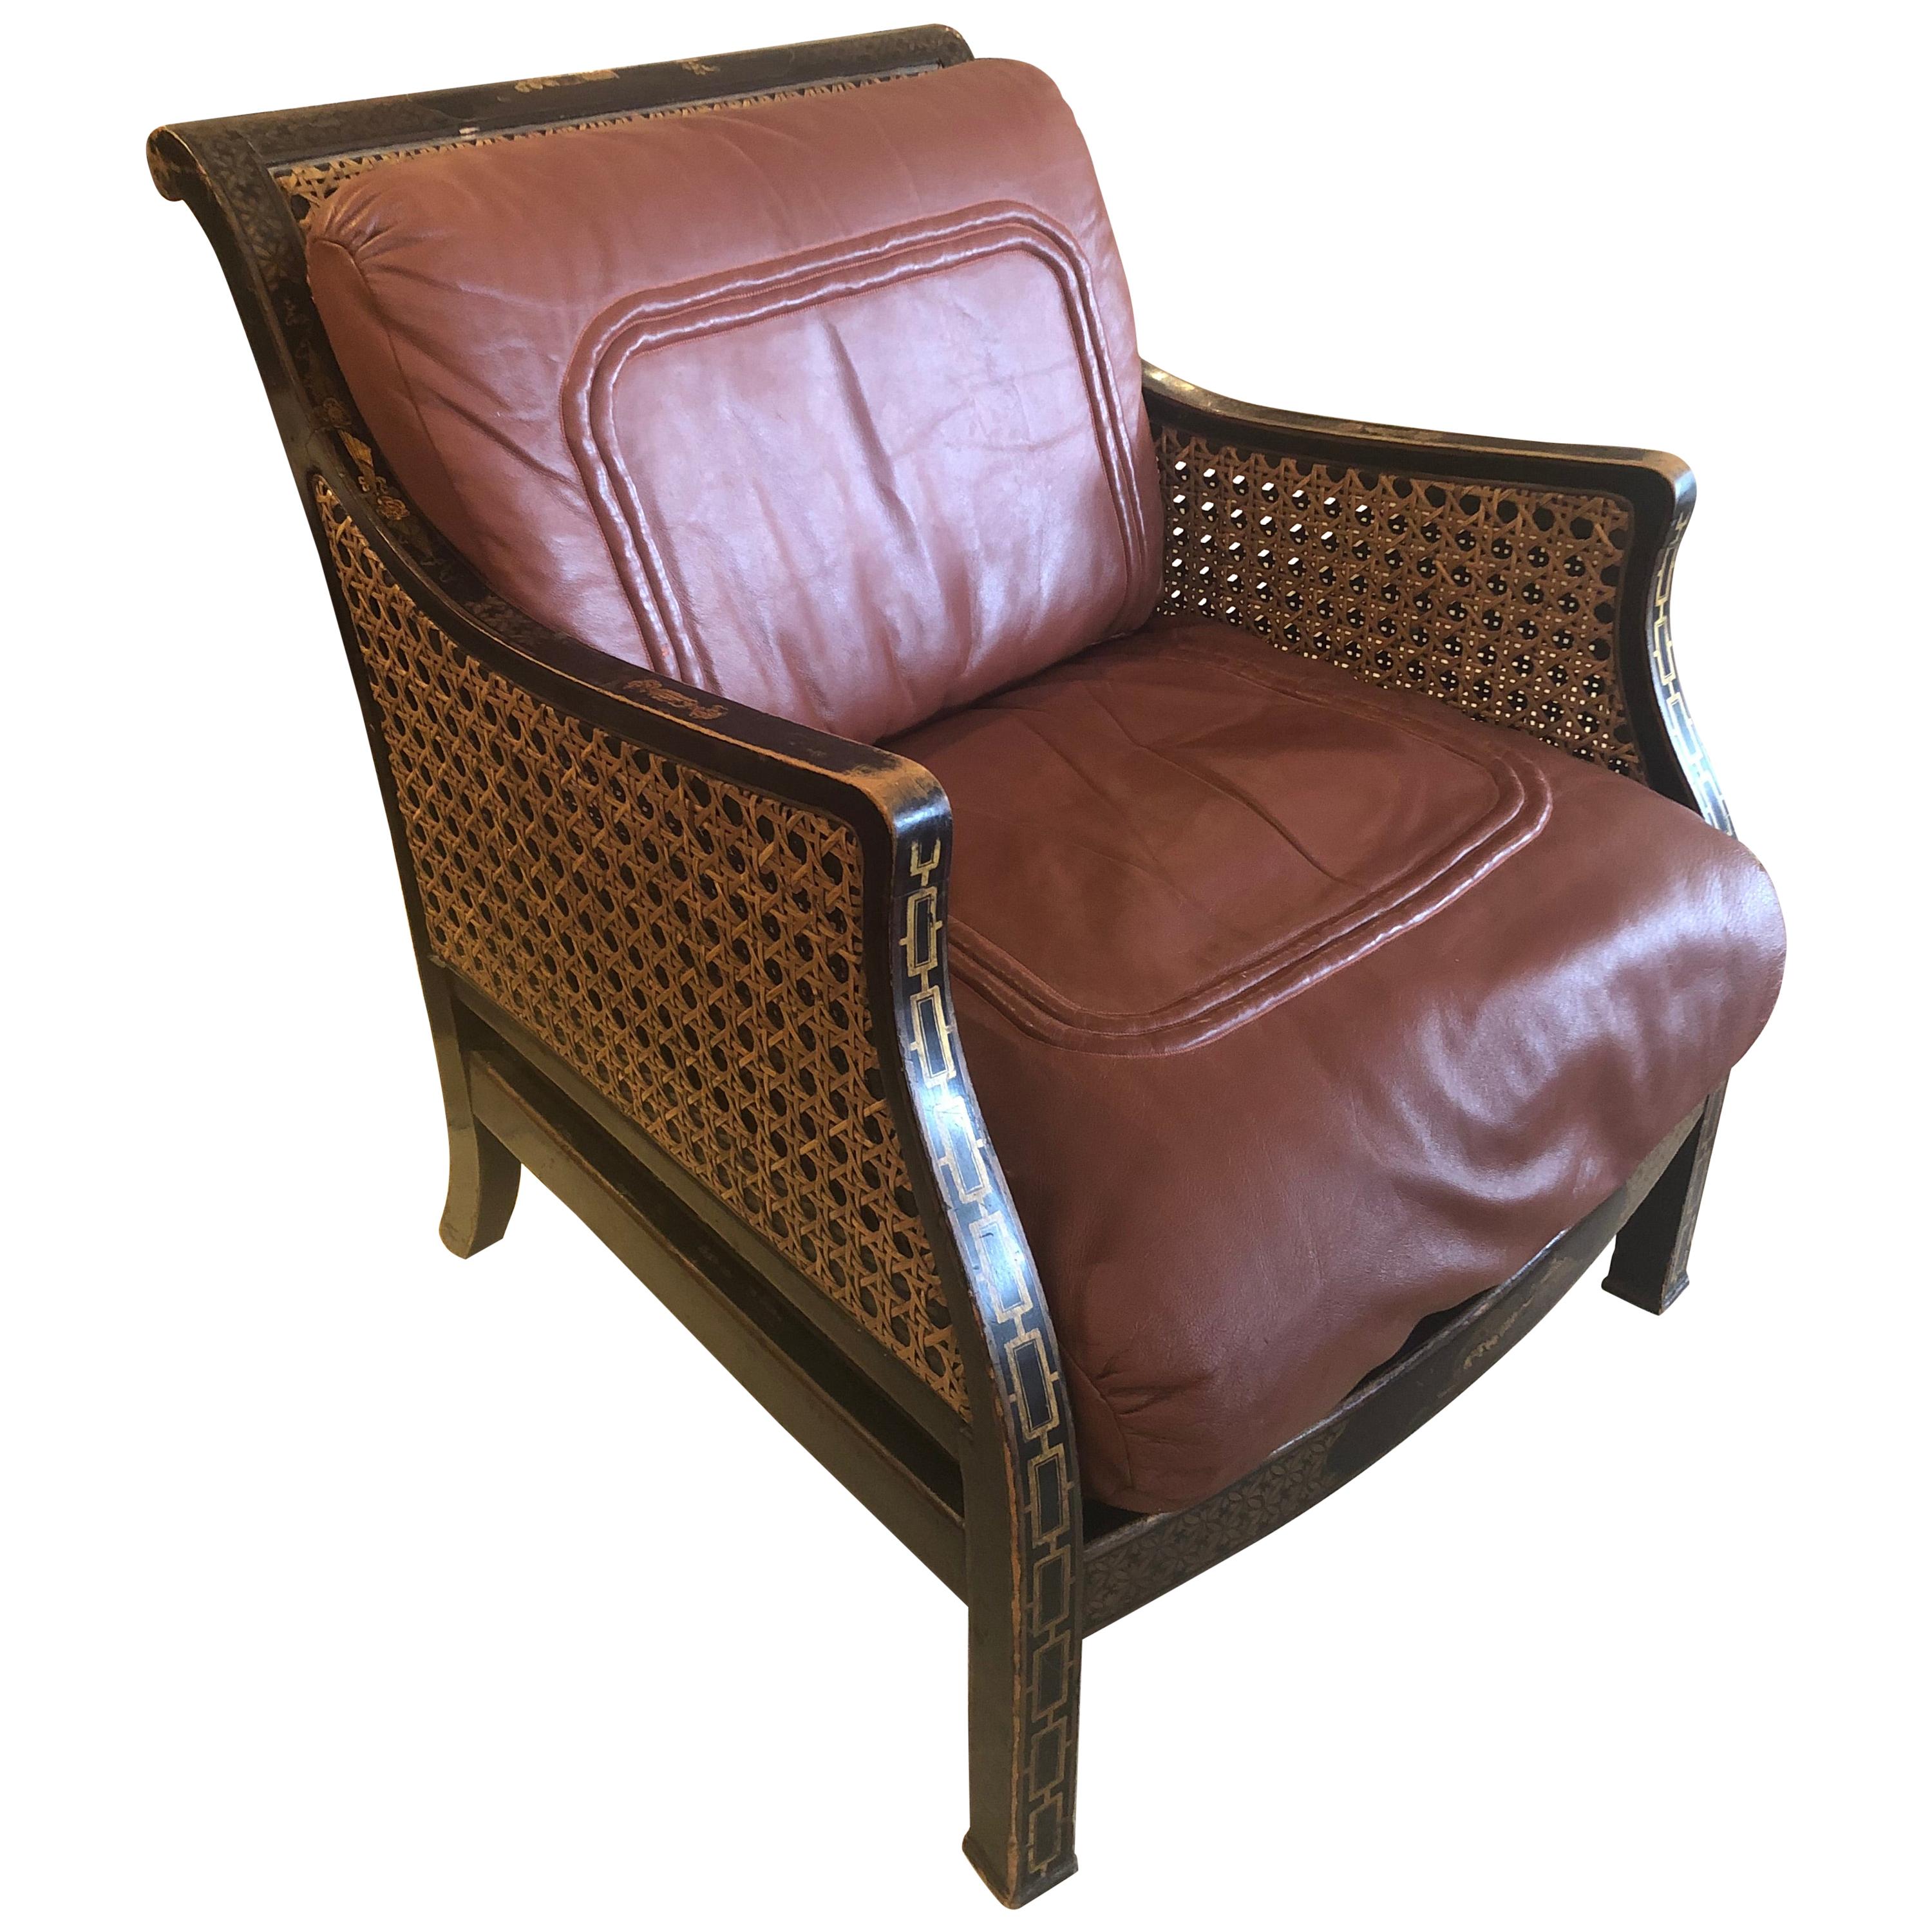 Rare English Regency Double Caned Chinoiserie Armchair with Leather Cushions